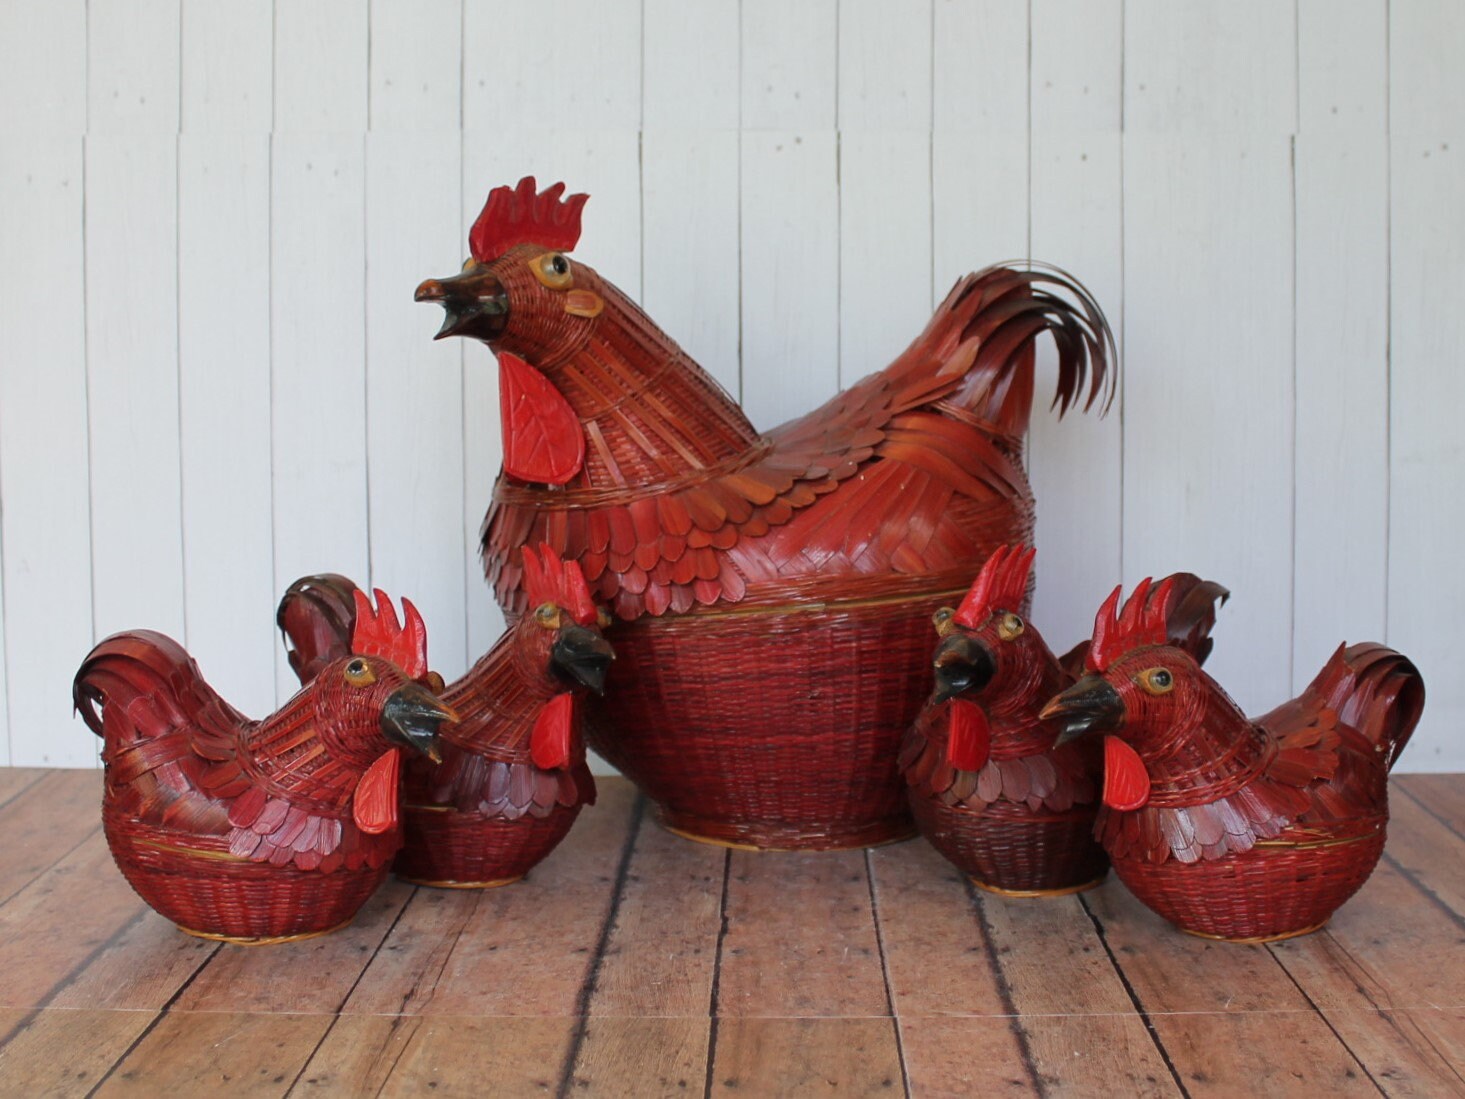 Vintage Wicker Woven Chicken Rooster Basket Set Of 5 Red With Wood Feathers Kiangsi Shanghai 